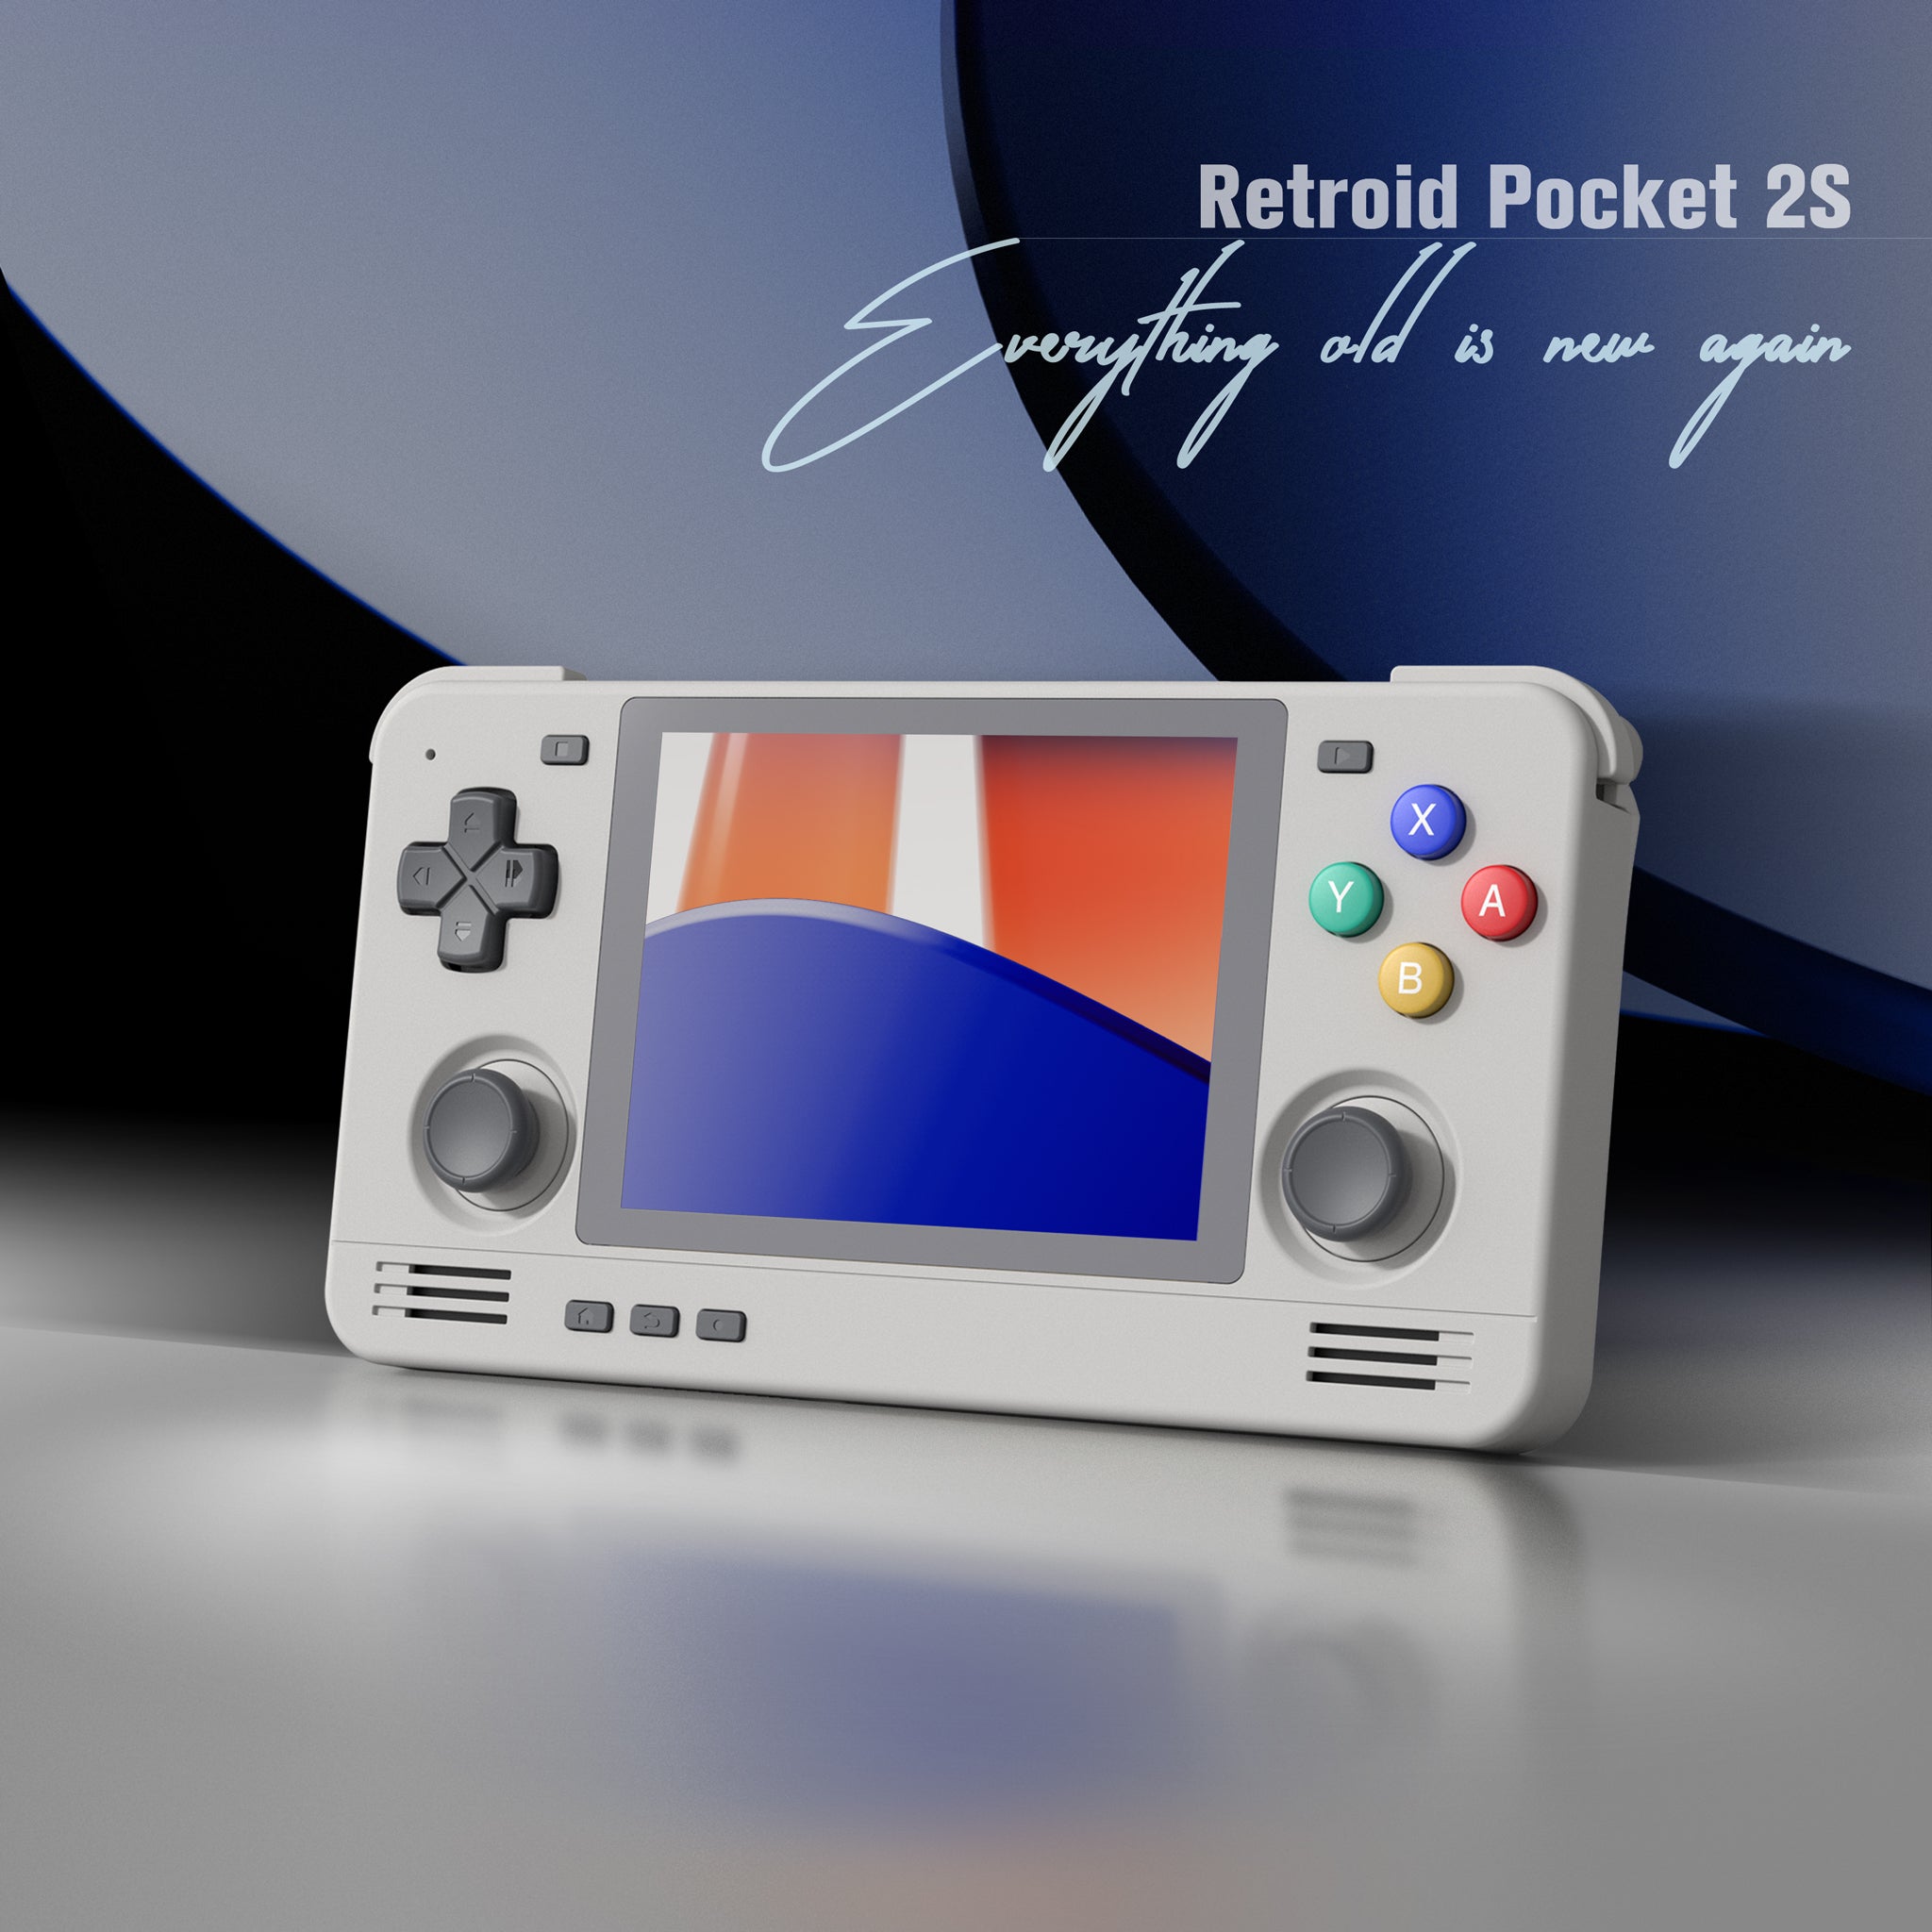 Retroid Pocket 3 handheld retro game system has a 4.7 inch display, Unisoc  T310 chip, and $119 starting price - Liliputing